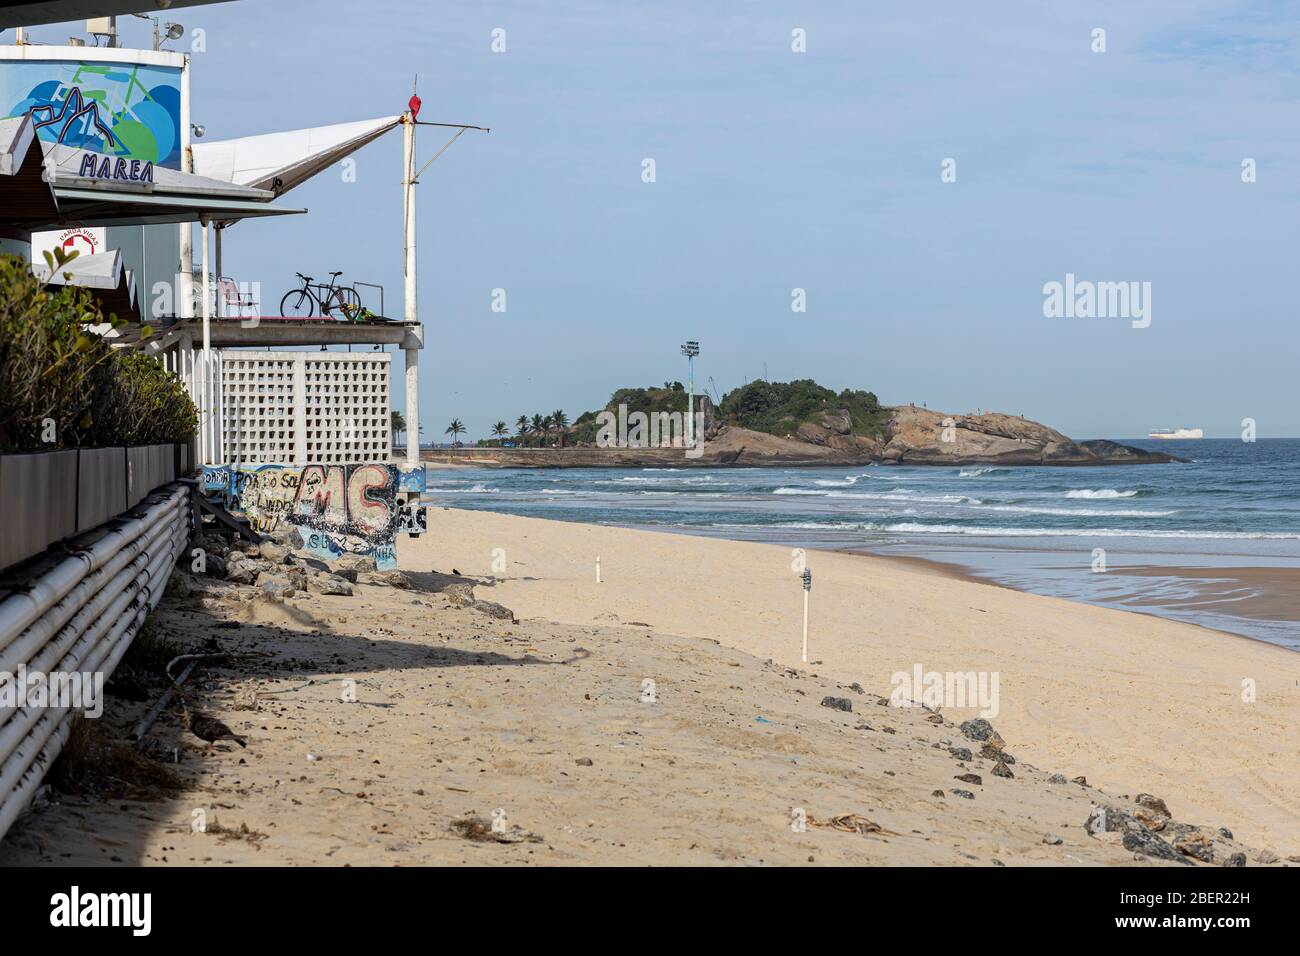 Empty beach with kiosk and lifeguard post with the Arpoador rock in the background during the COVID-19 Corona virus outbreak Stock Photo